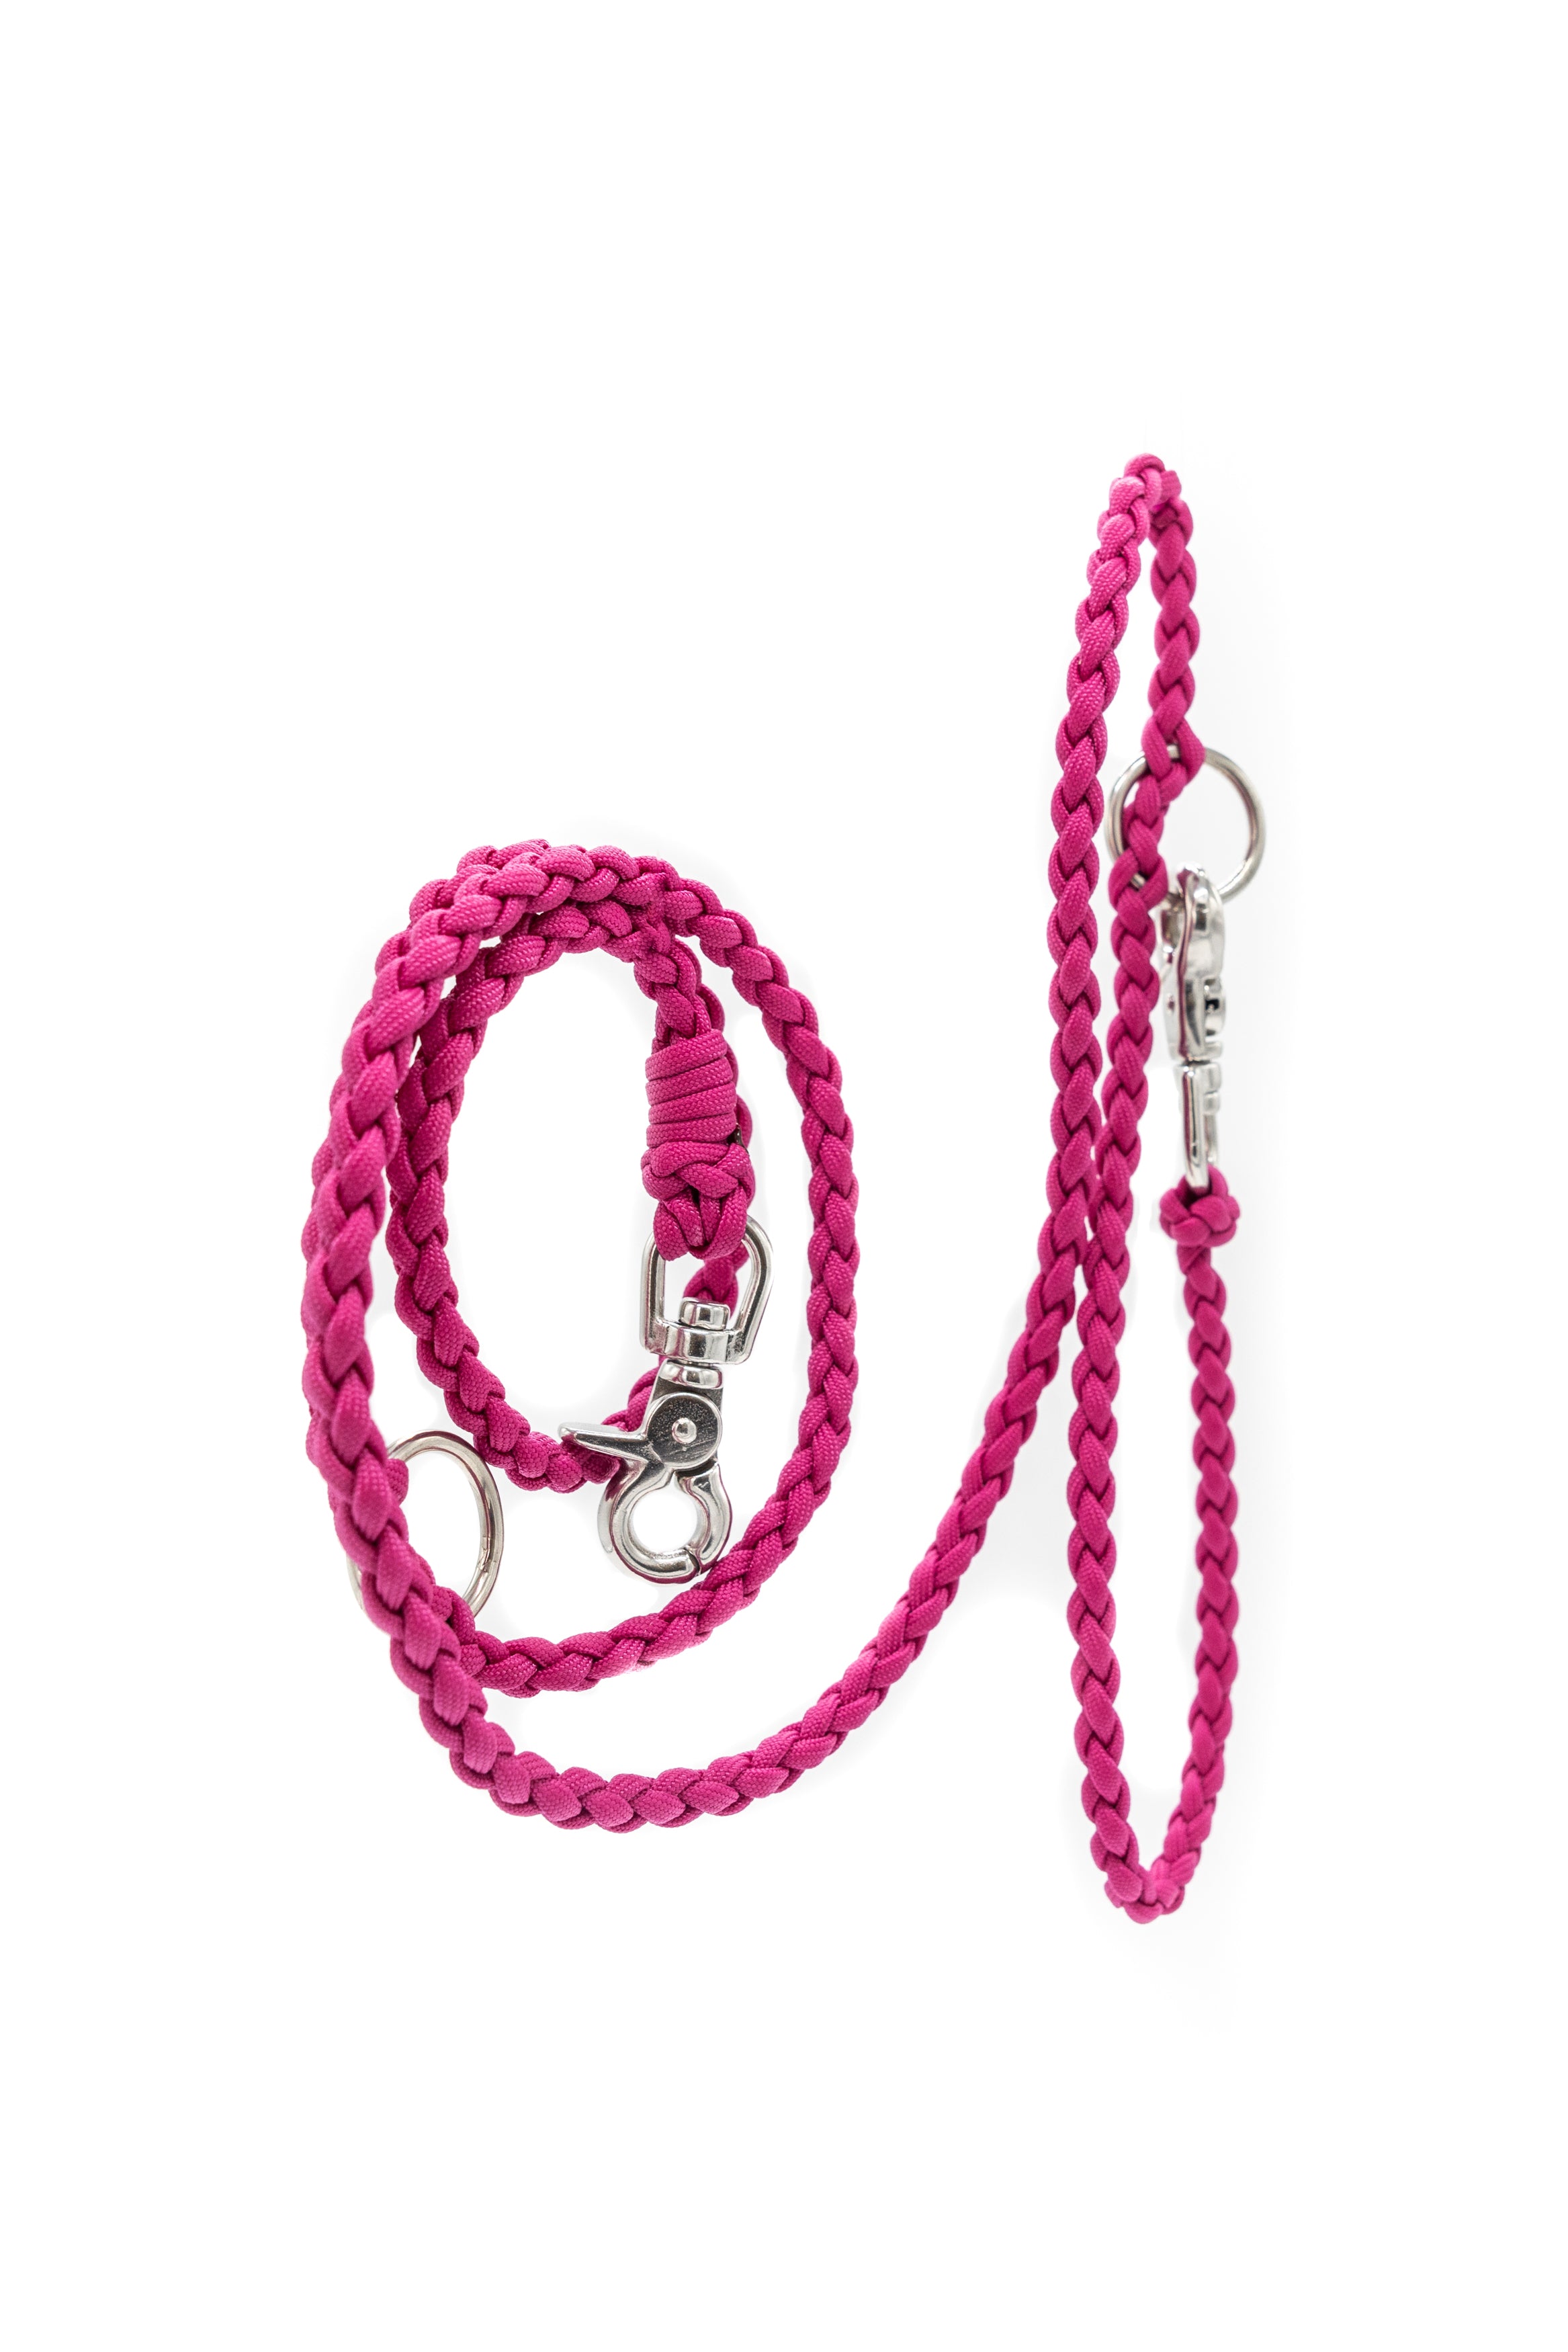 Multi-Functional Light-weight Paracord Leash